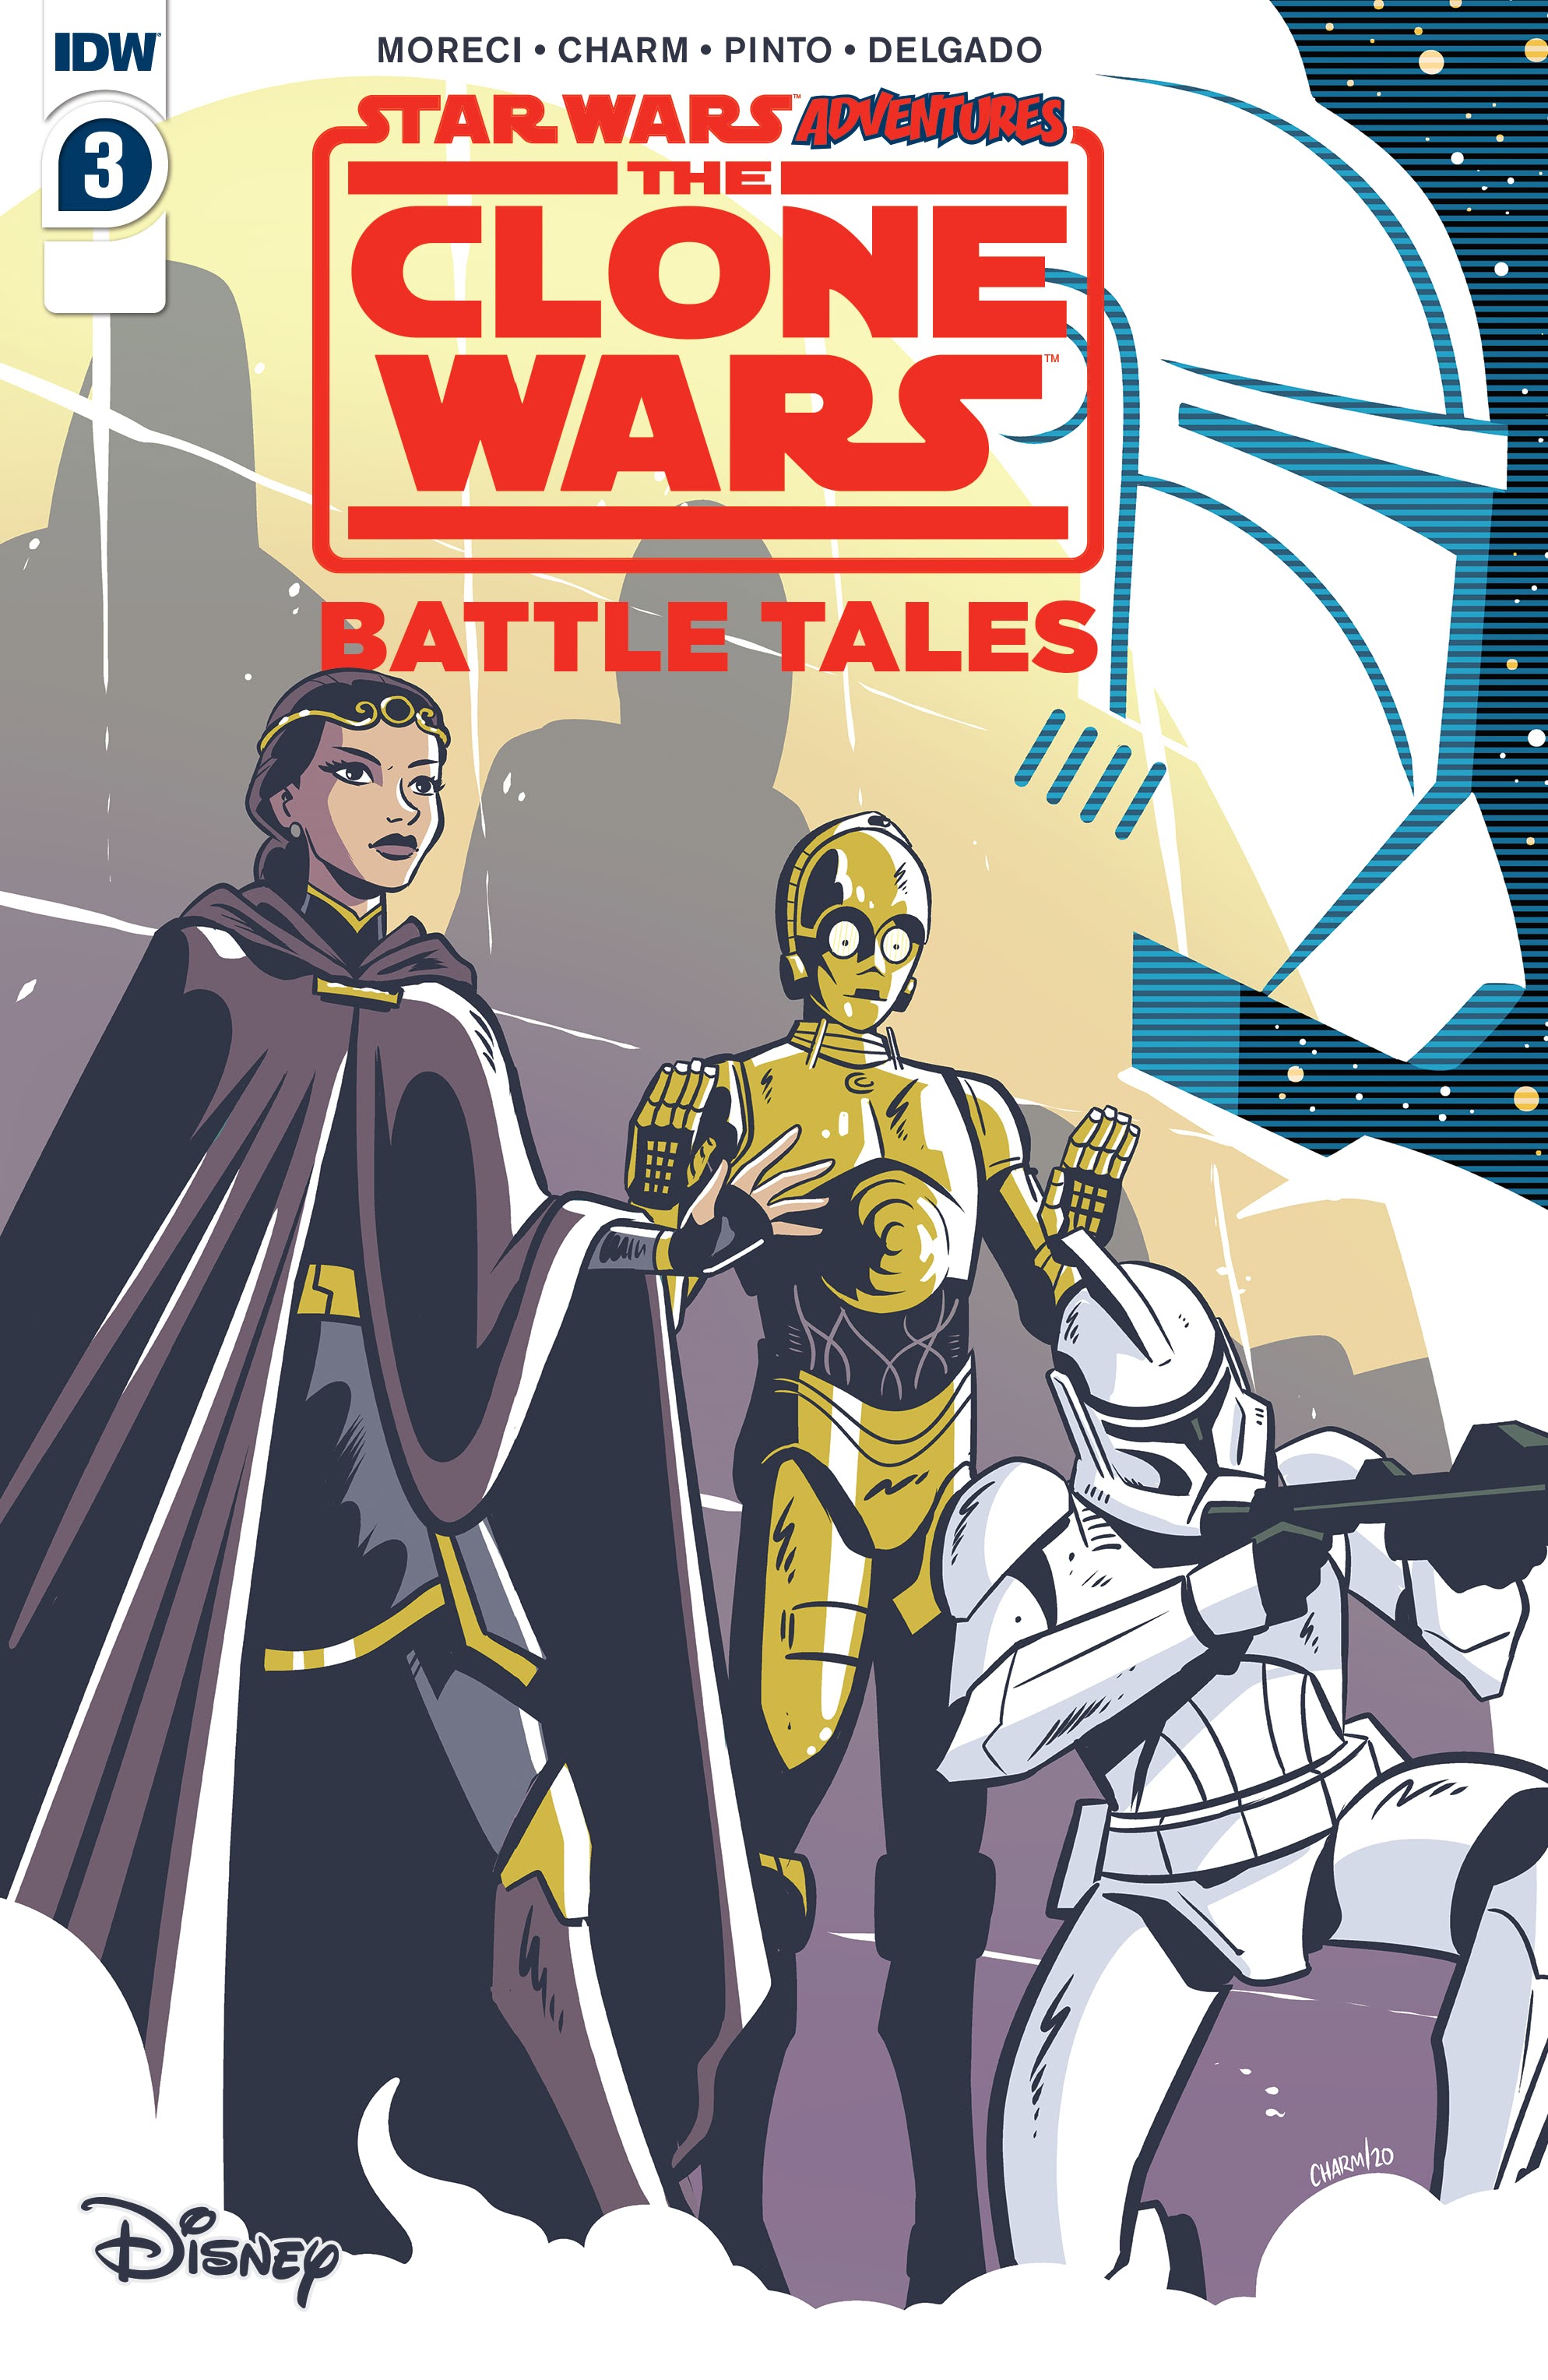 Star Wars Adventures: The Clone Wars-Battle Tales issue 3 - Page 1